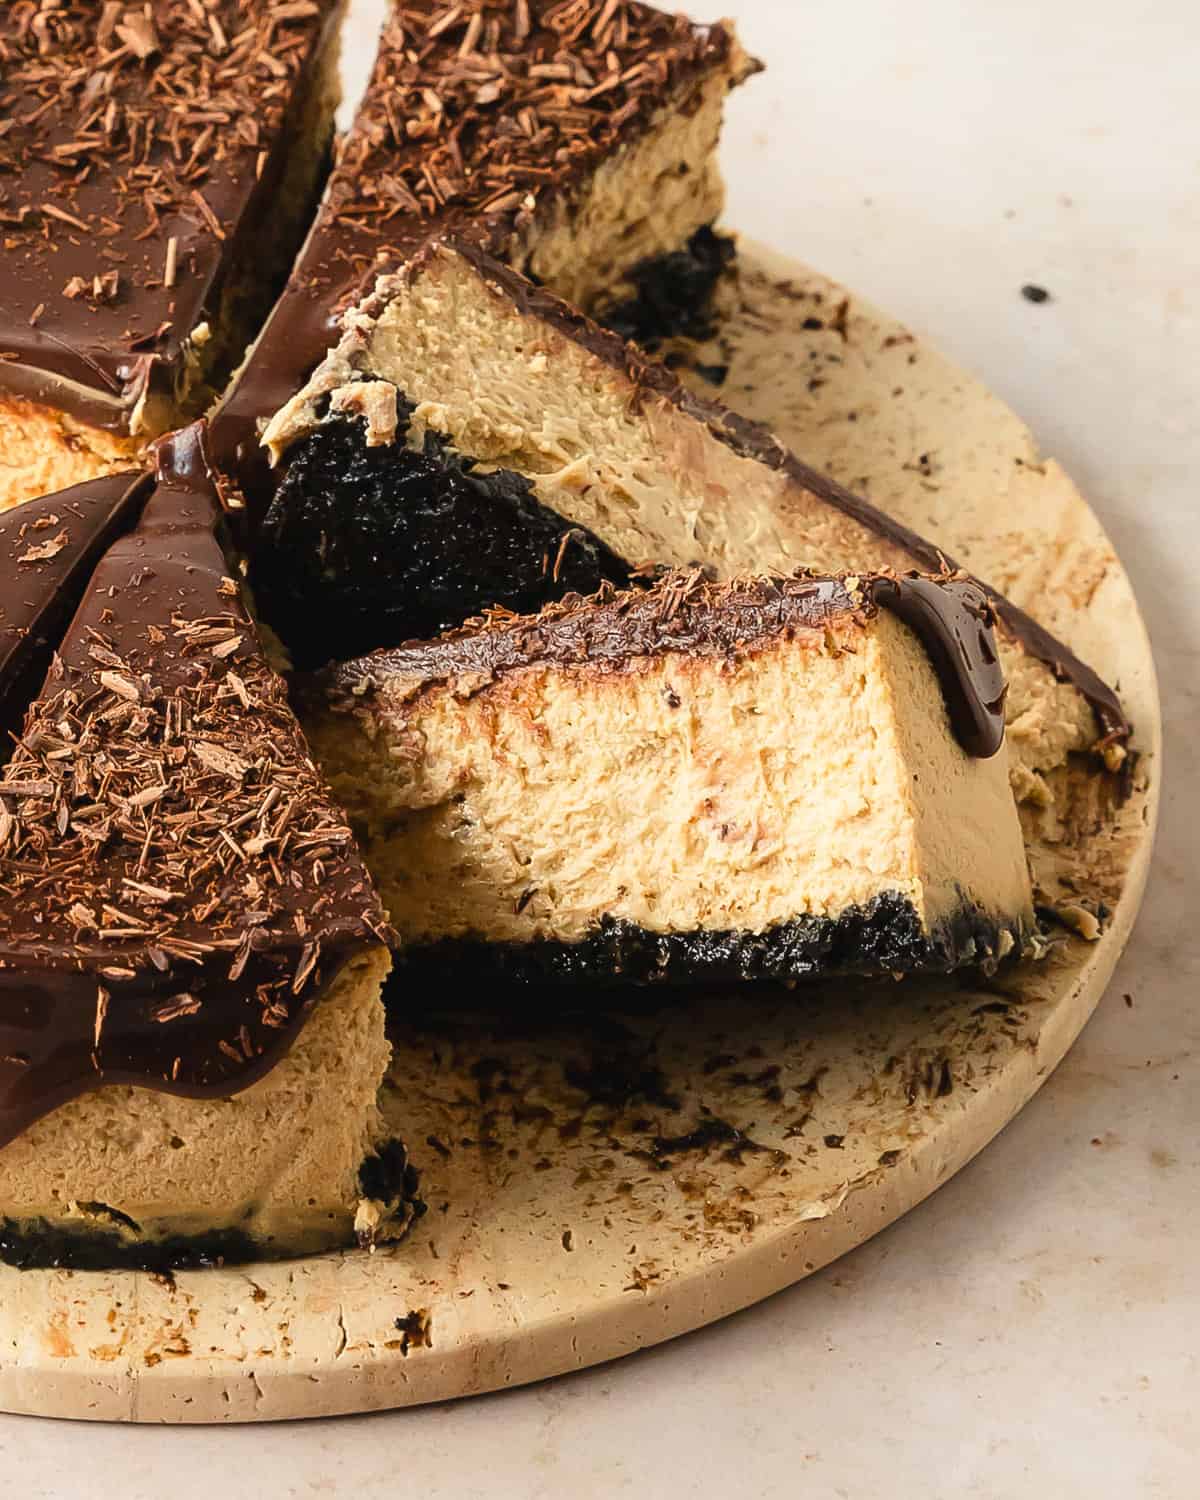 Coffee cheesecake is a smooth and creamy espresso cheesecake with an espresso chocolate cookie crust. For even more decadent coffee flavor, this espresso cheesecake is topped with an easy chocolate coffee ganache. Make this chocolate espresso cheesecake the next time you need a deliciously decadent dessert that’s perfect for the coffee and cheesecake lover in your life.  